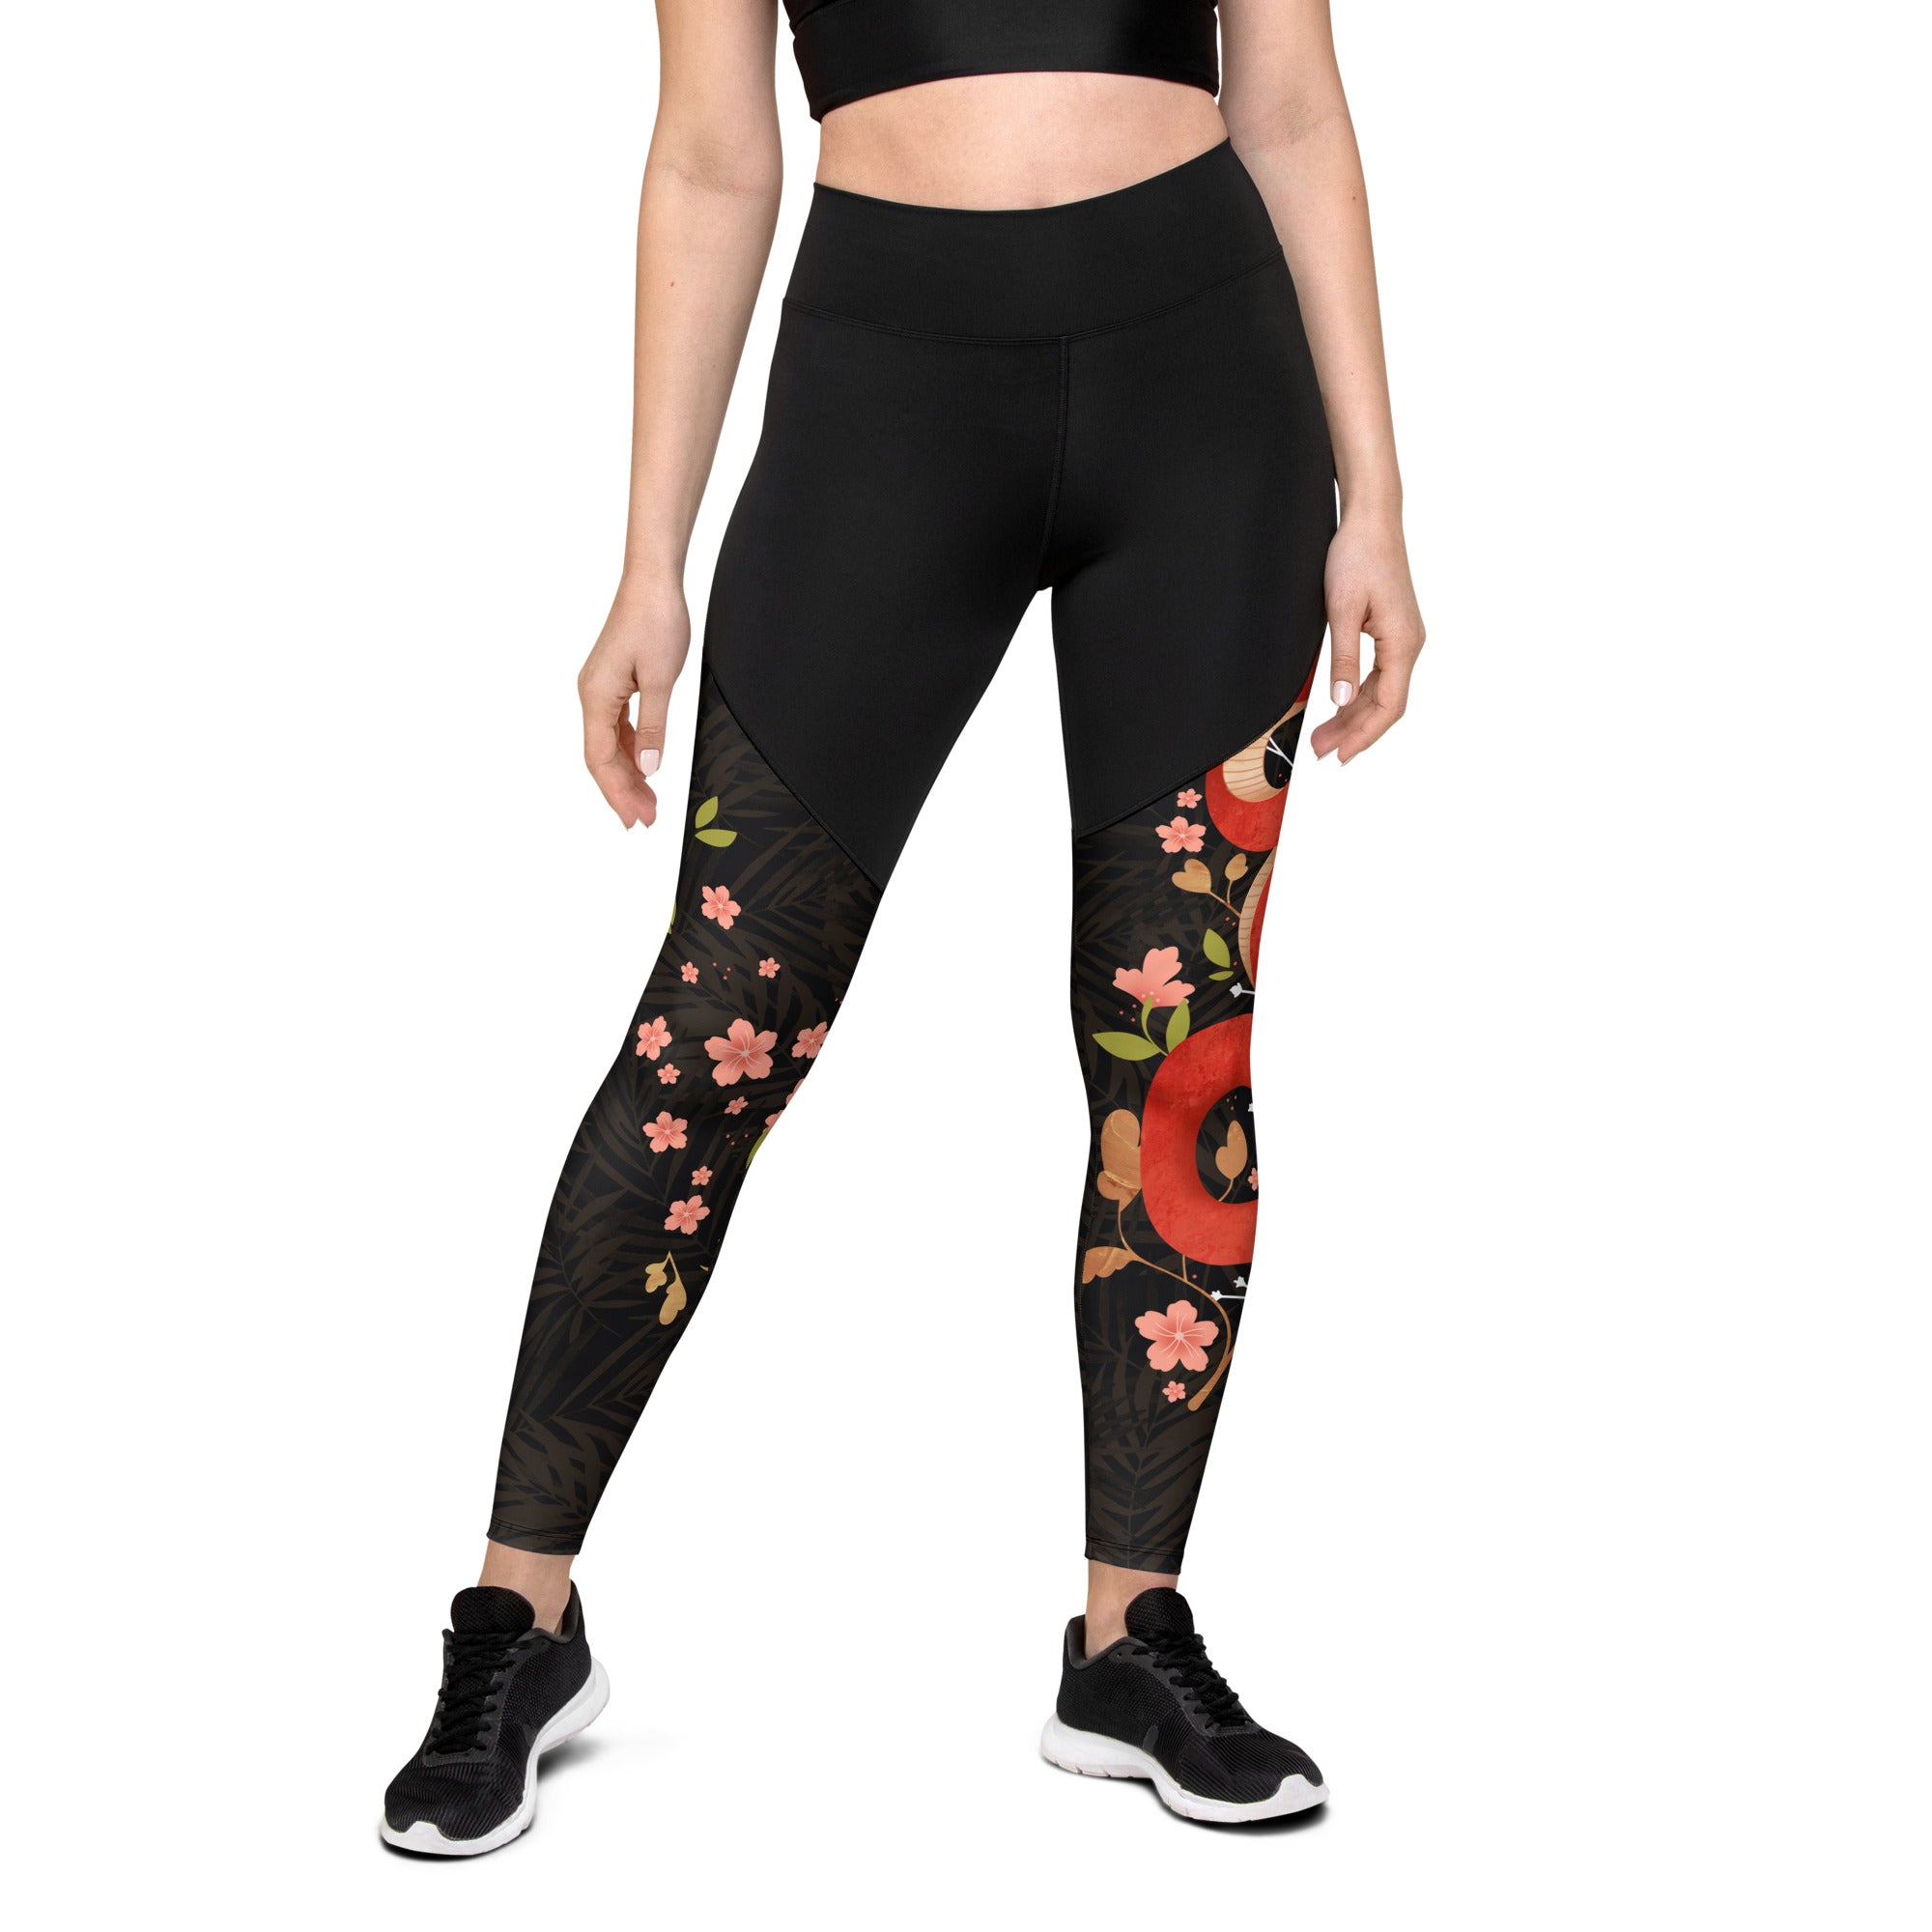 Snakes & Flowers Compression Leggings